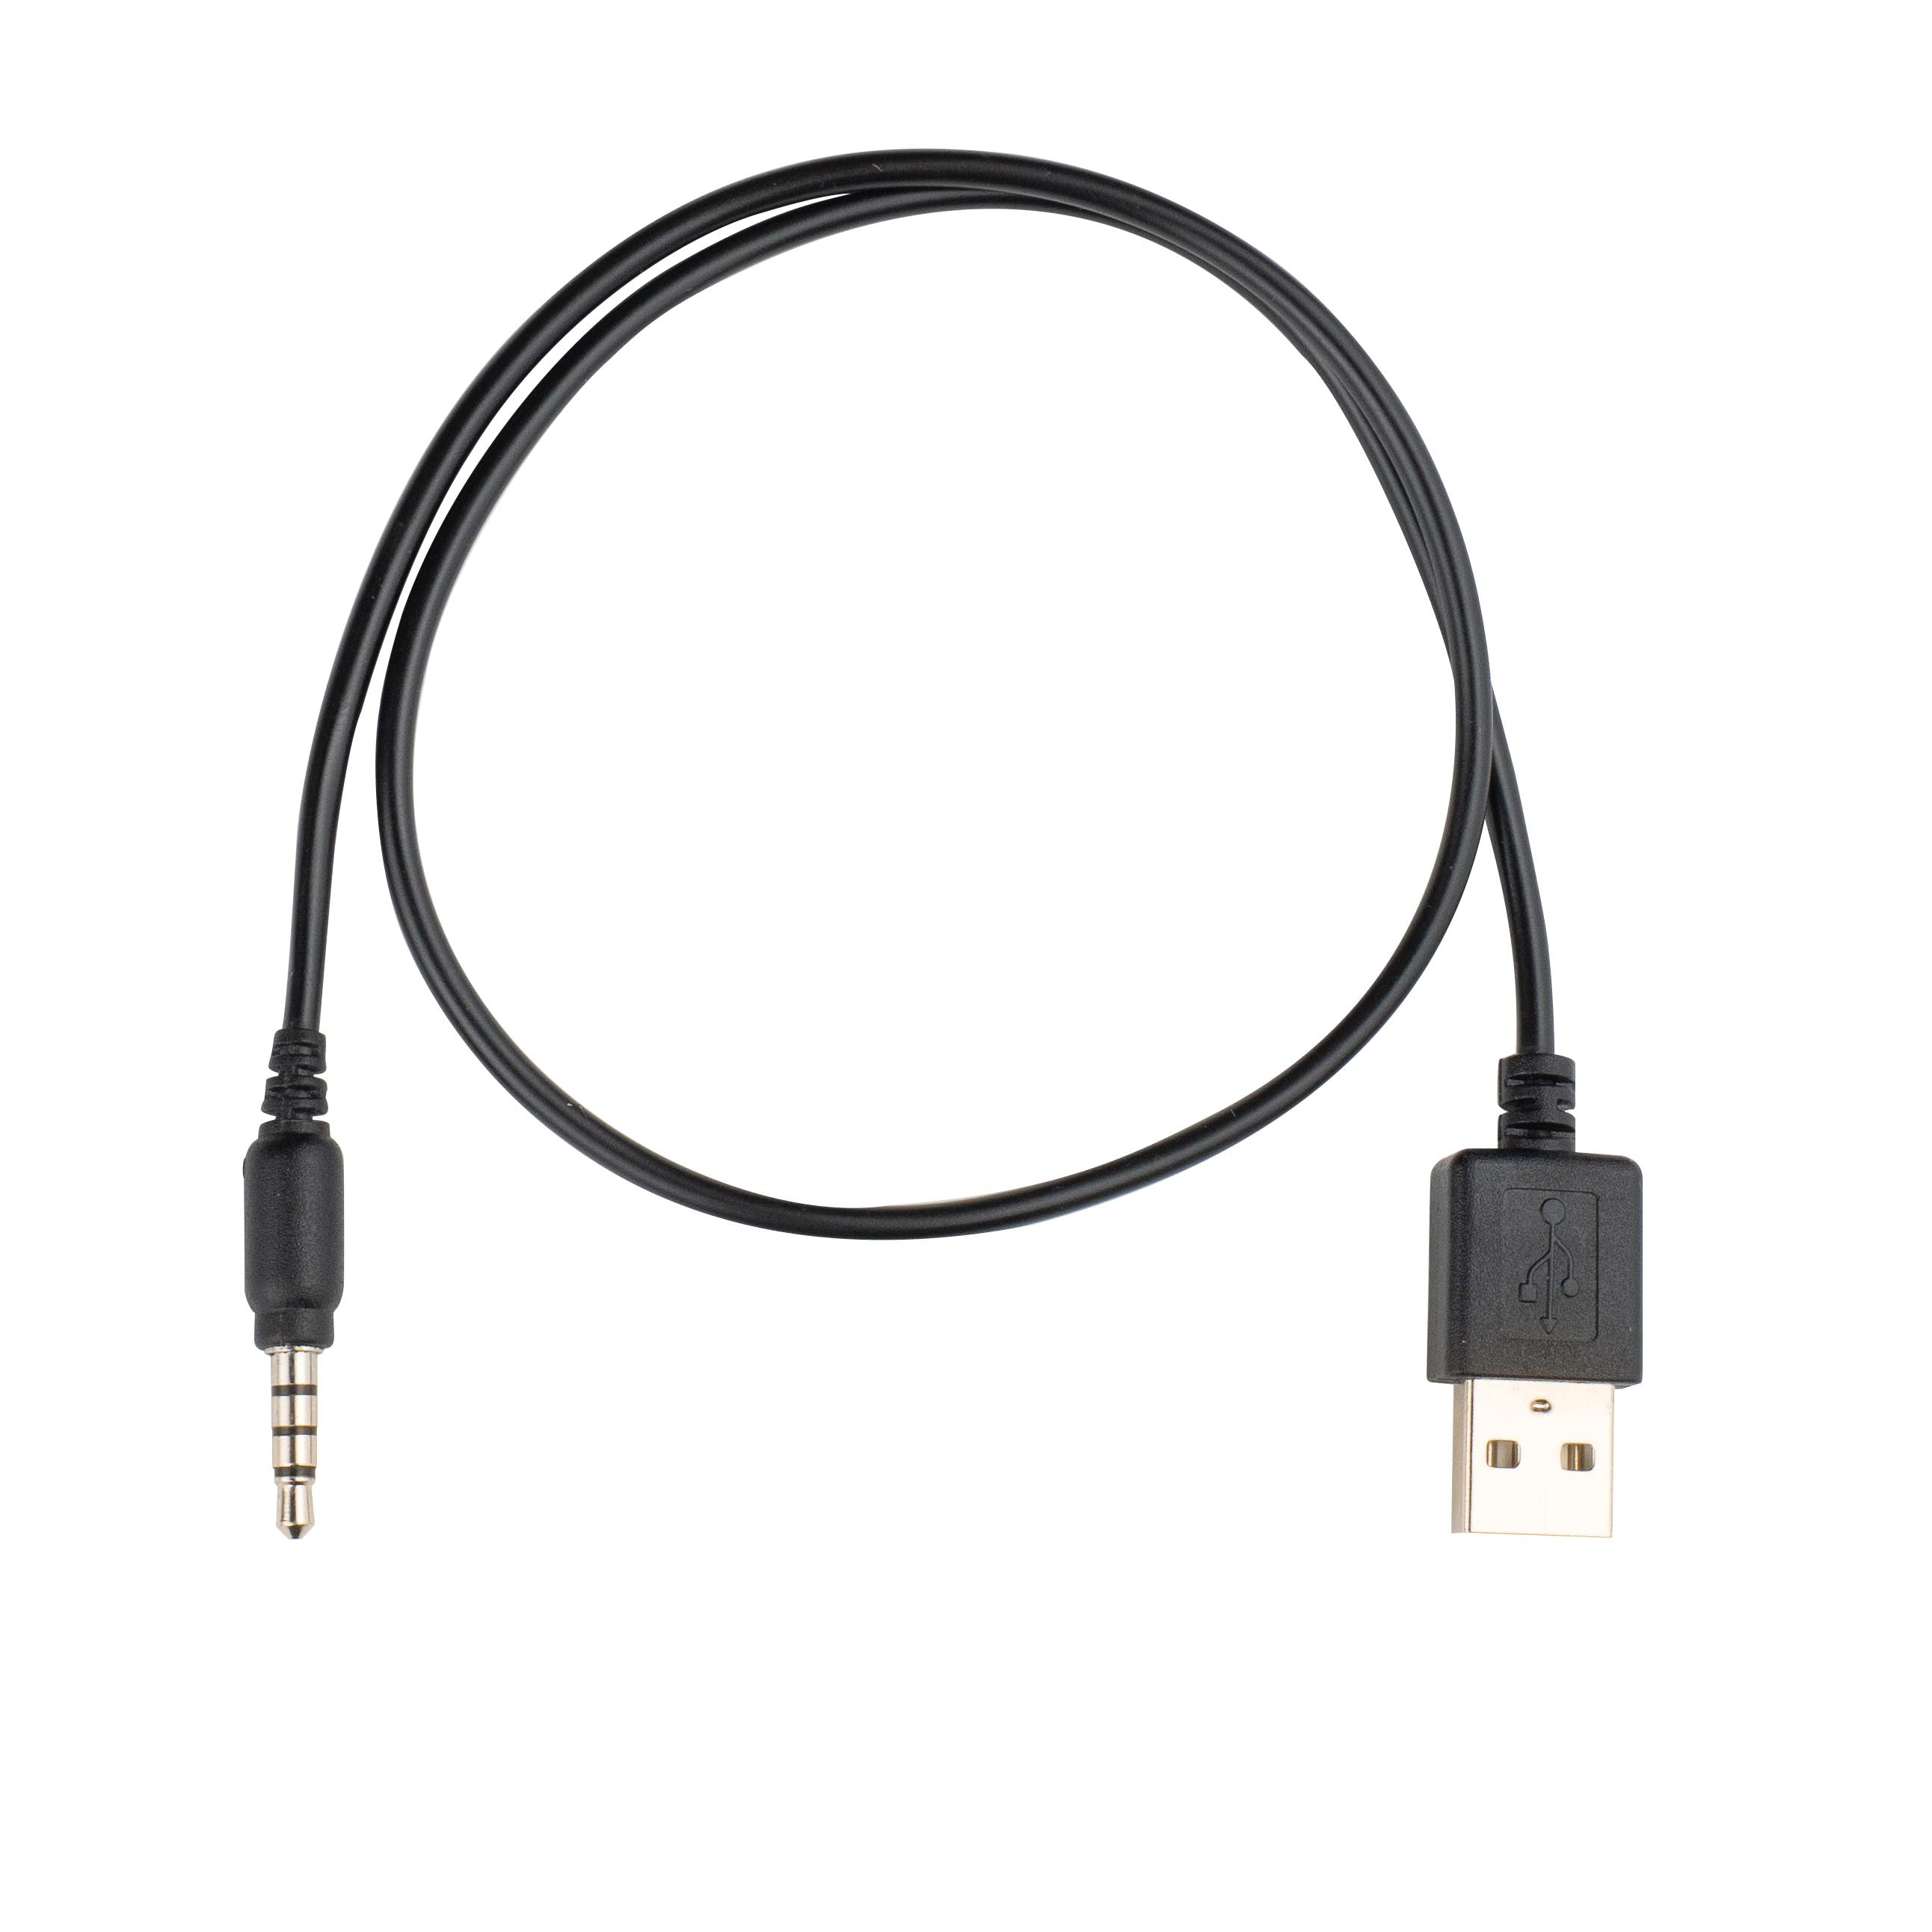 USB Charge & Sync Cord for Delphin Waterproof Micro Tablet